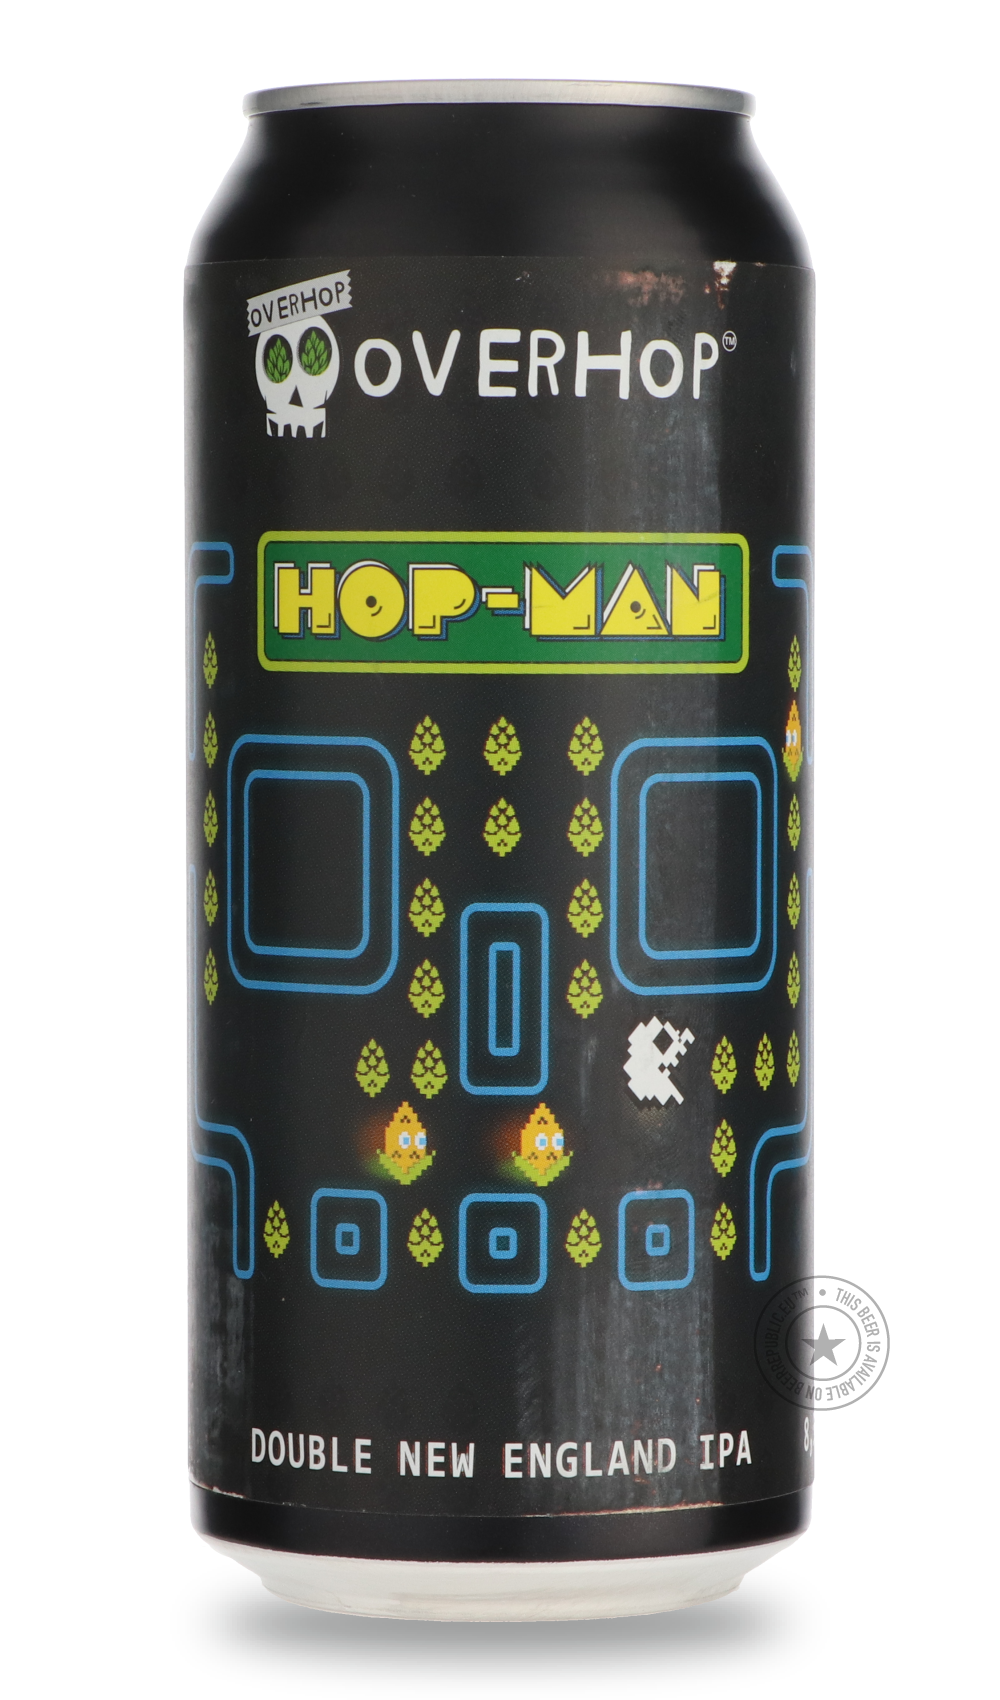 -OverHop Canada- Hop-Man-IPA- Only @ Beer Republic - The best online beer store for American & Canadian craft beer - Buy beer online from the USA and Canada - Bier online kopen - Amerikaans bier kopen - Craft beer store - Craft beer kopen - Amerikanisch bier kaufen - Bier online kaufen - Acheter biere online - IPA - Stout - Porter - New England IPA - Hazy IPA - Imperial Stout - Barrel Aged - Barrel Aged Imperial Stout - Brown - Dark beer - Blond - Blonde - Pilsner - Lager - Wheat - Weizen - Amber - Barley W